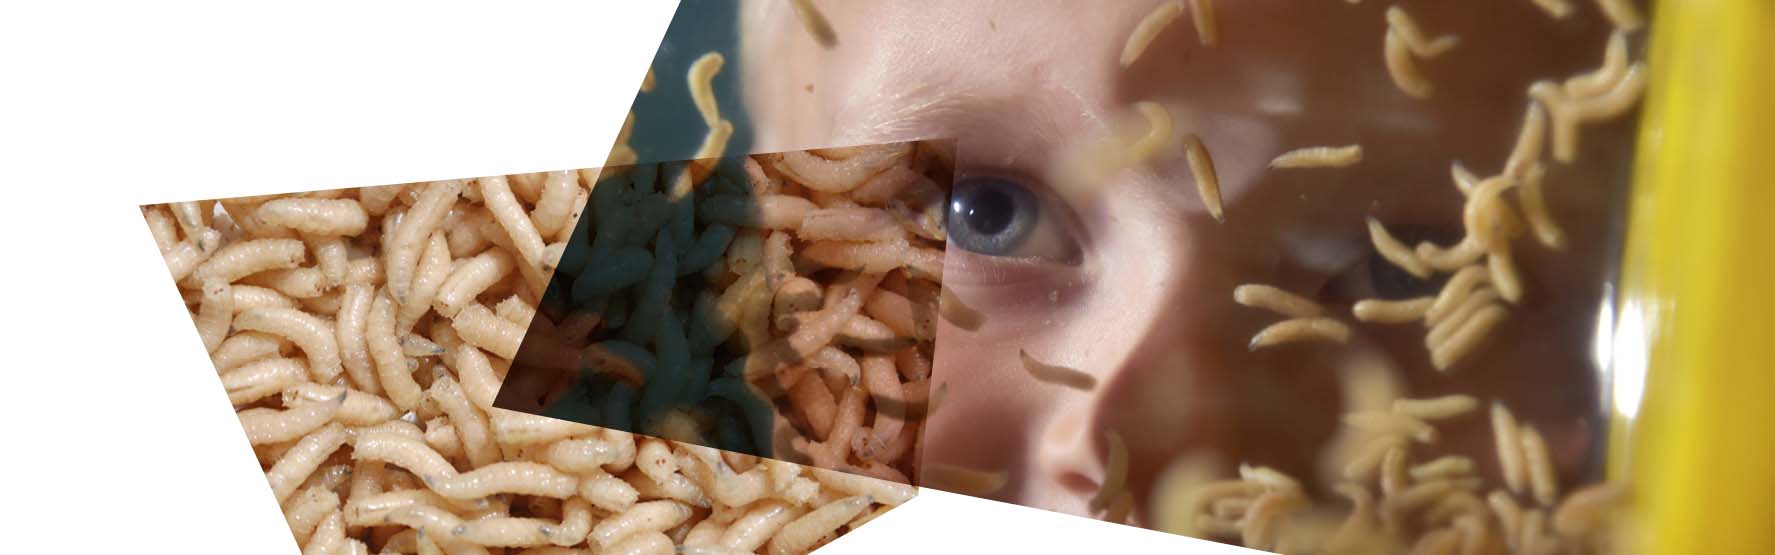 Maggots in front of child's face